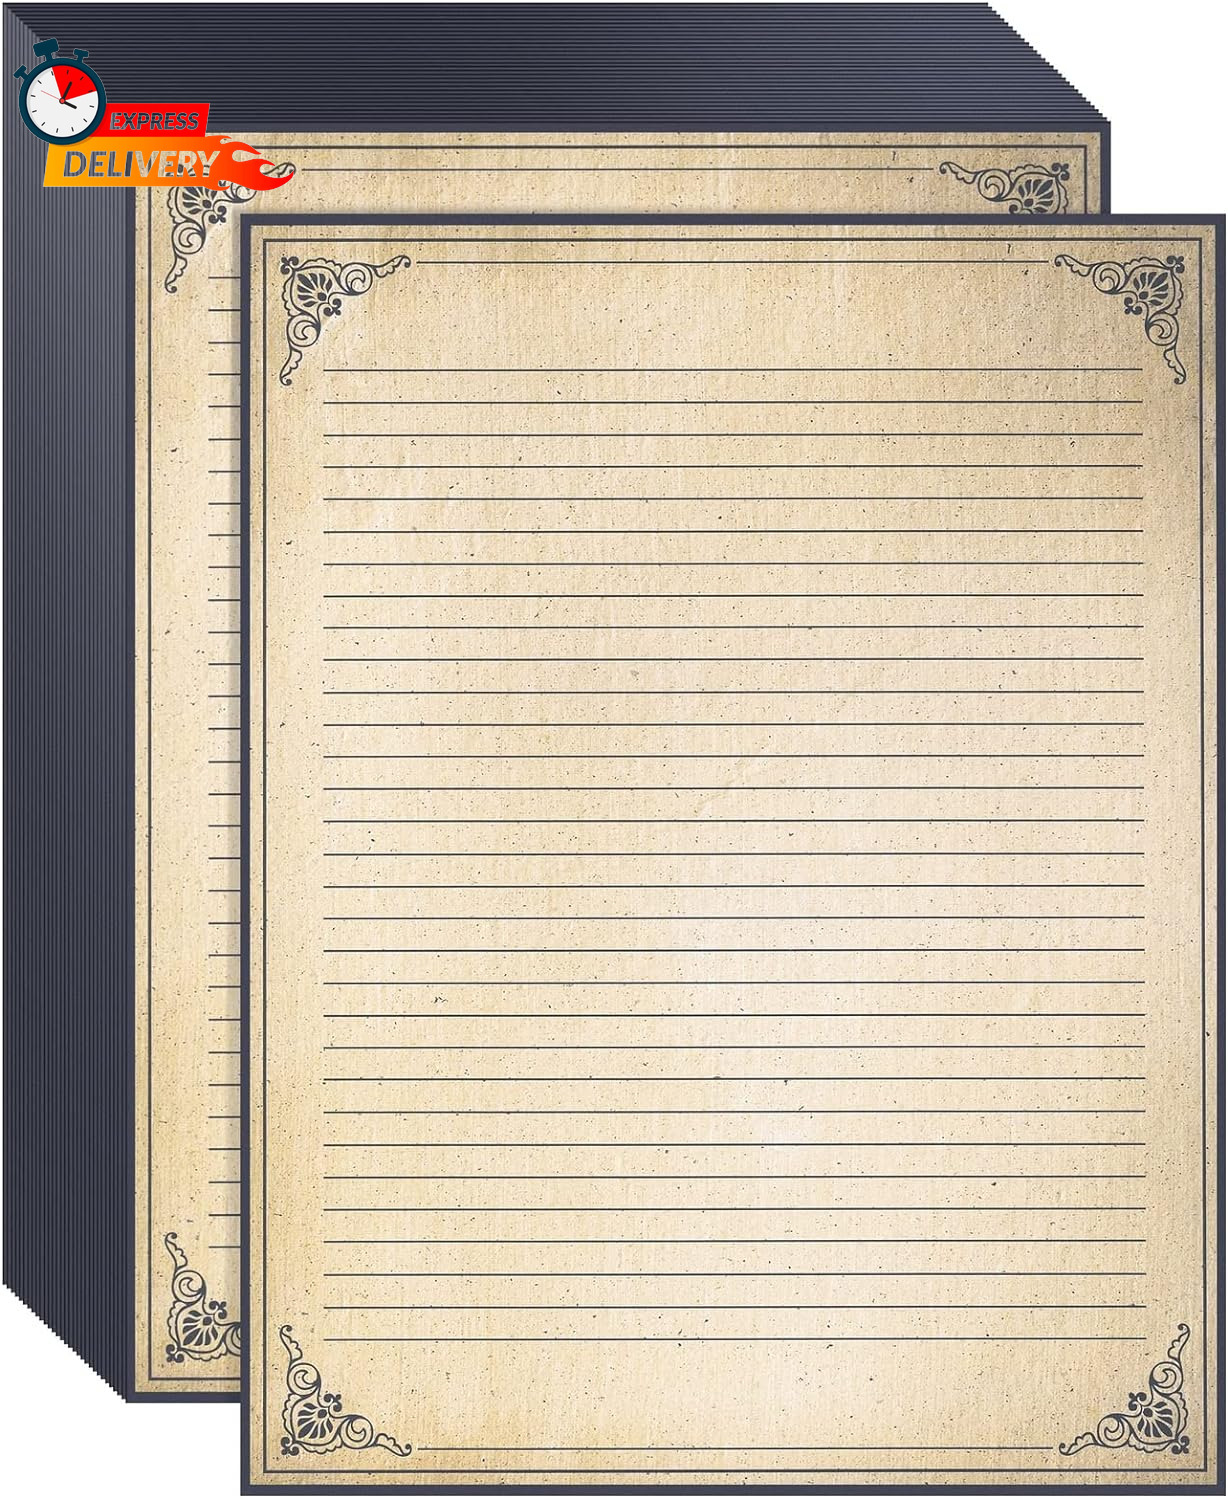 48 Sheets Vintage Lined Paper with Antique Border for Writing Letters, 8.5 X 11